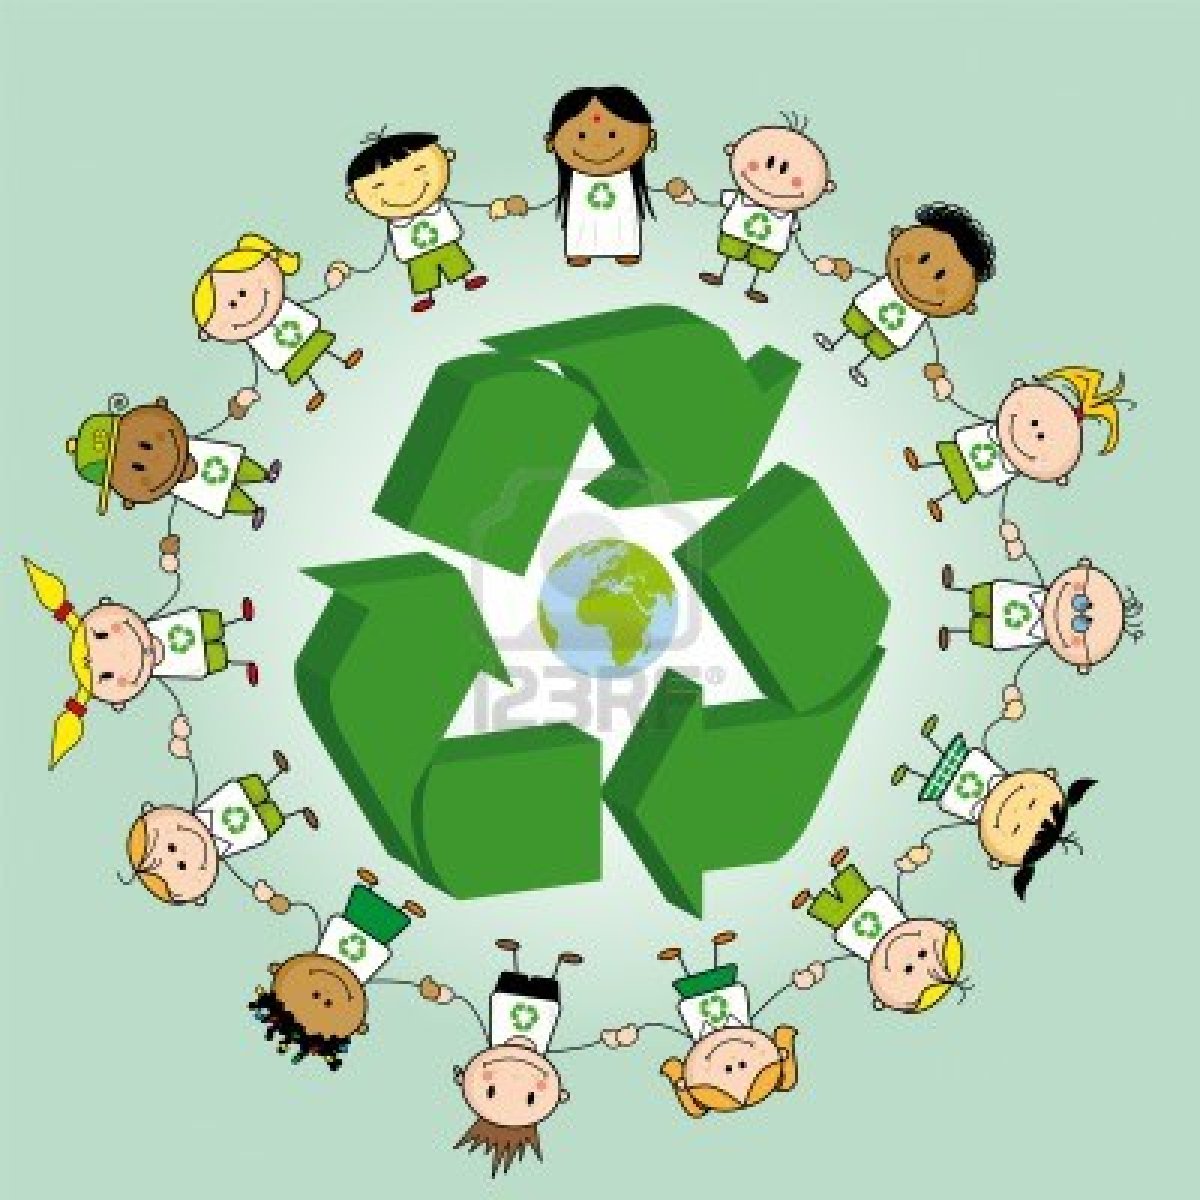 16499515-kids-holding-hands-around-a-recycle-symbol-and-the-earth